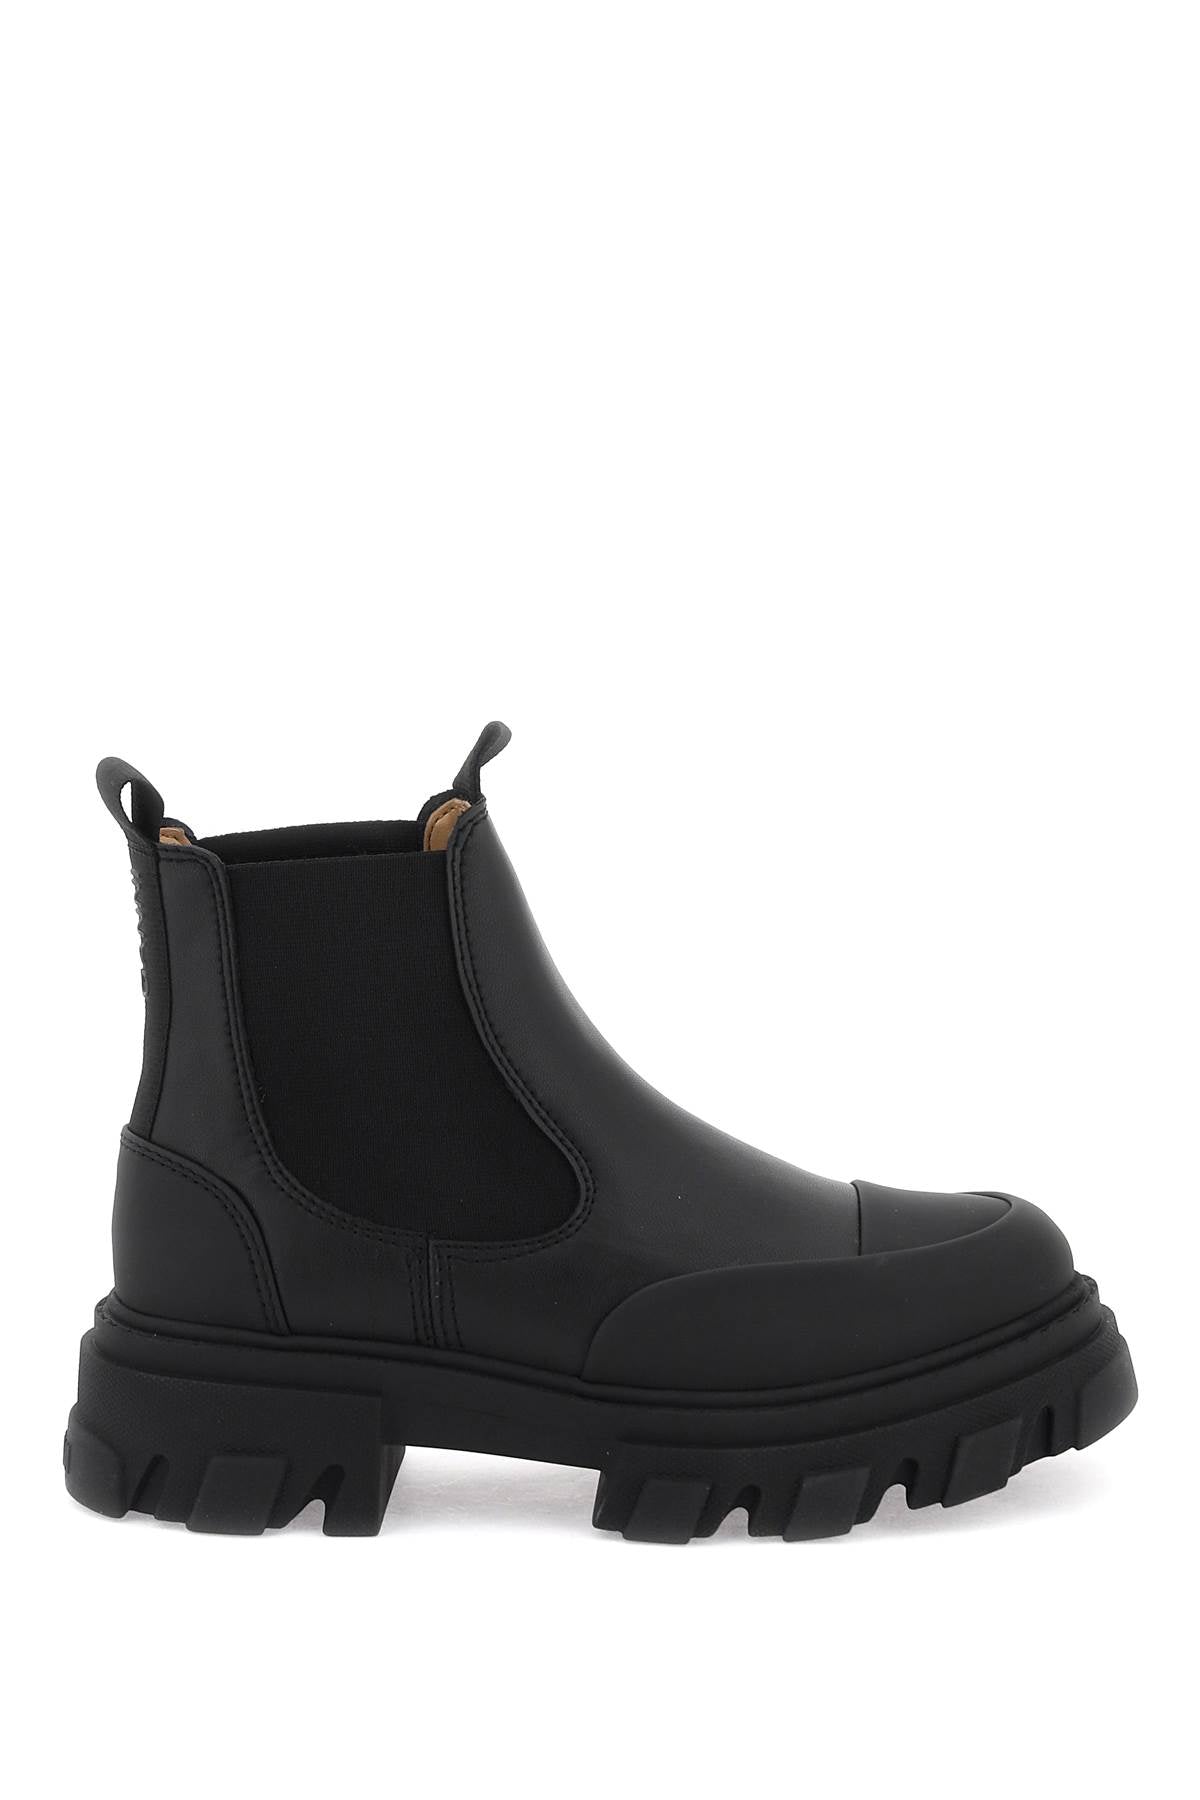 Ganni cleated low chelsea ankle boots-0